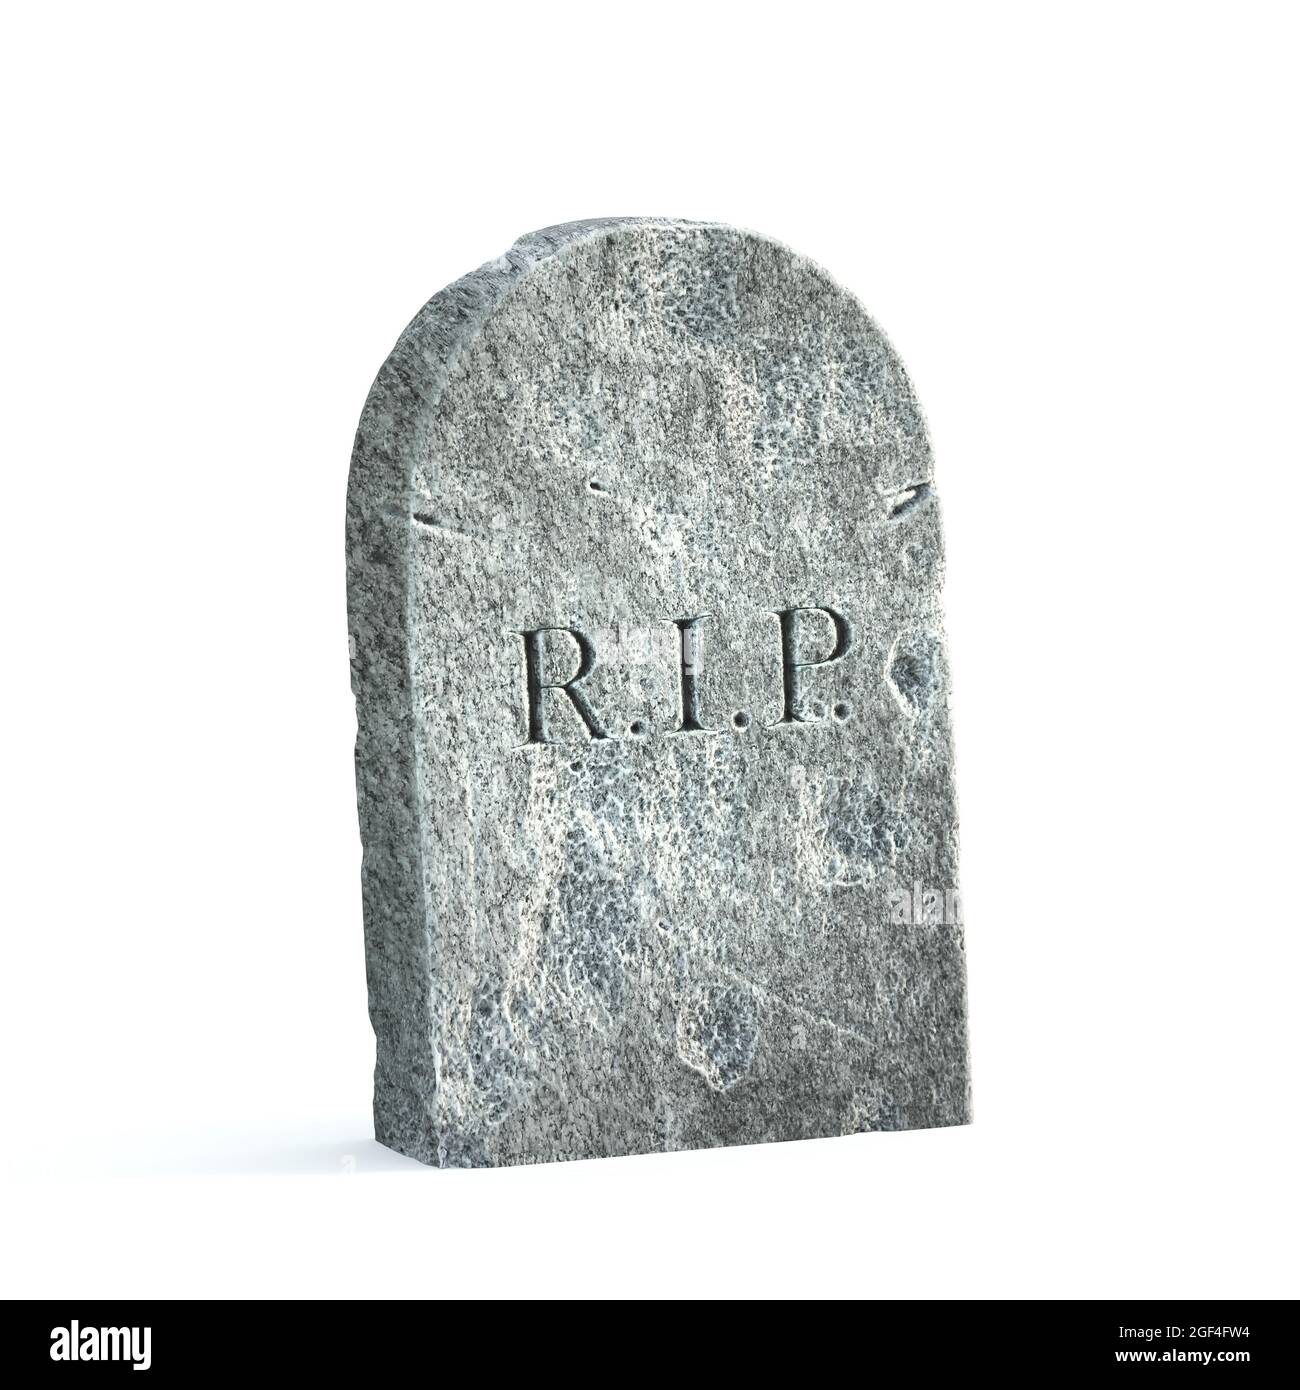 Halloween, grey concrete RIP tombstone transparent background PNG clipart